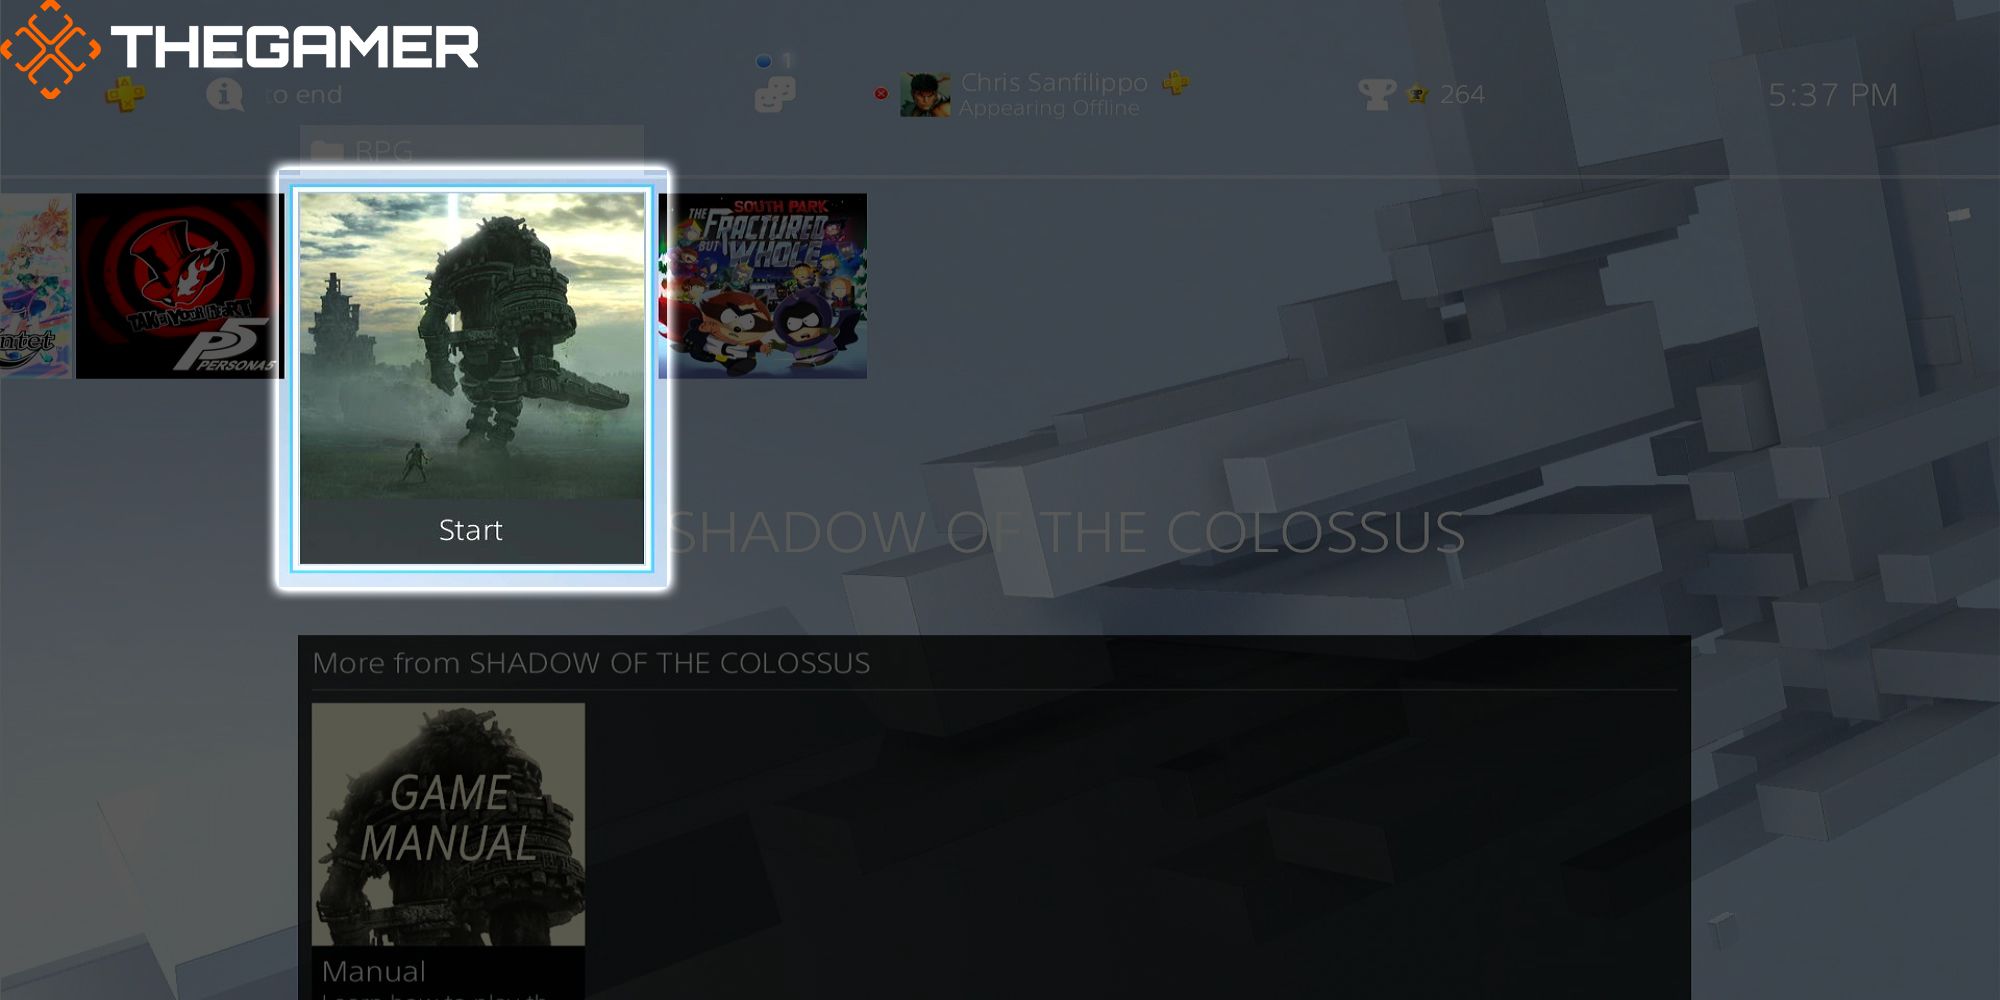 The Shadow Of The Colossus start icon in the RPG Folder of Chris's Sad PS4 Home Page.